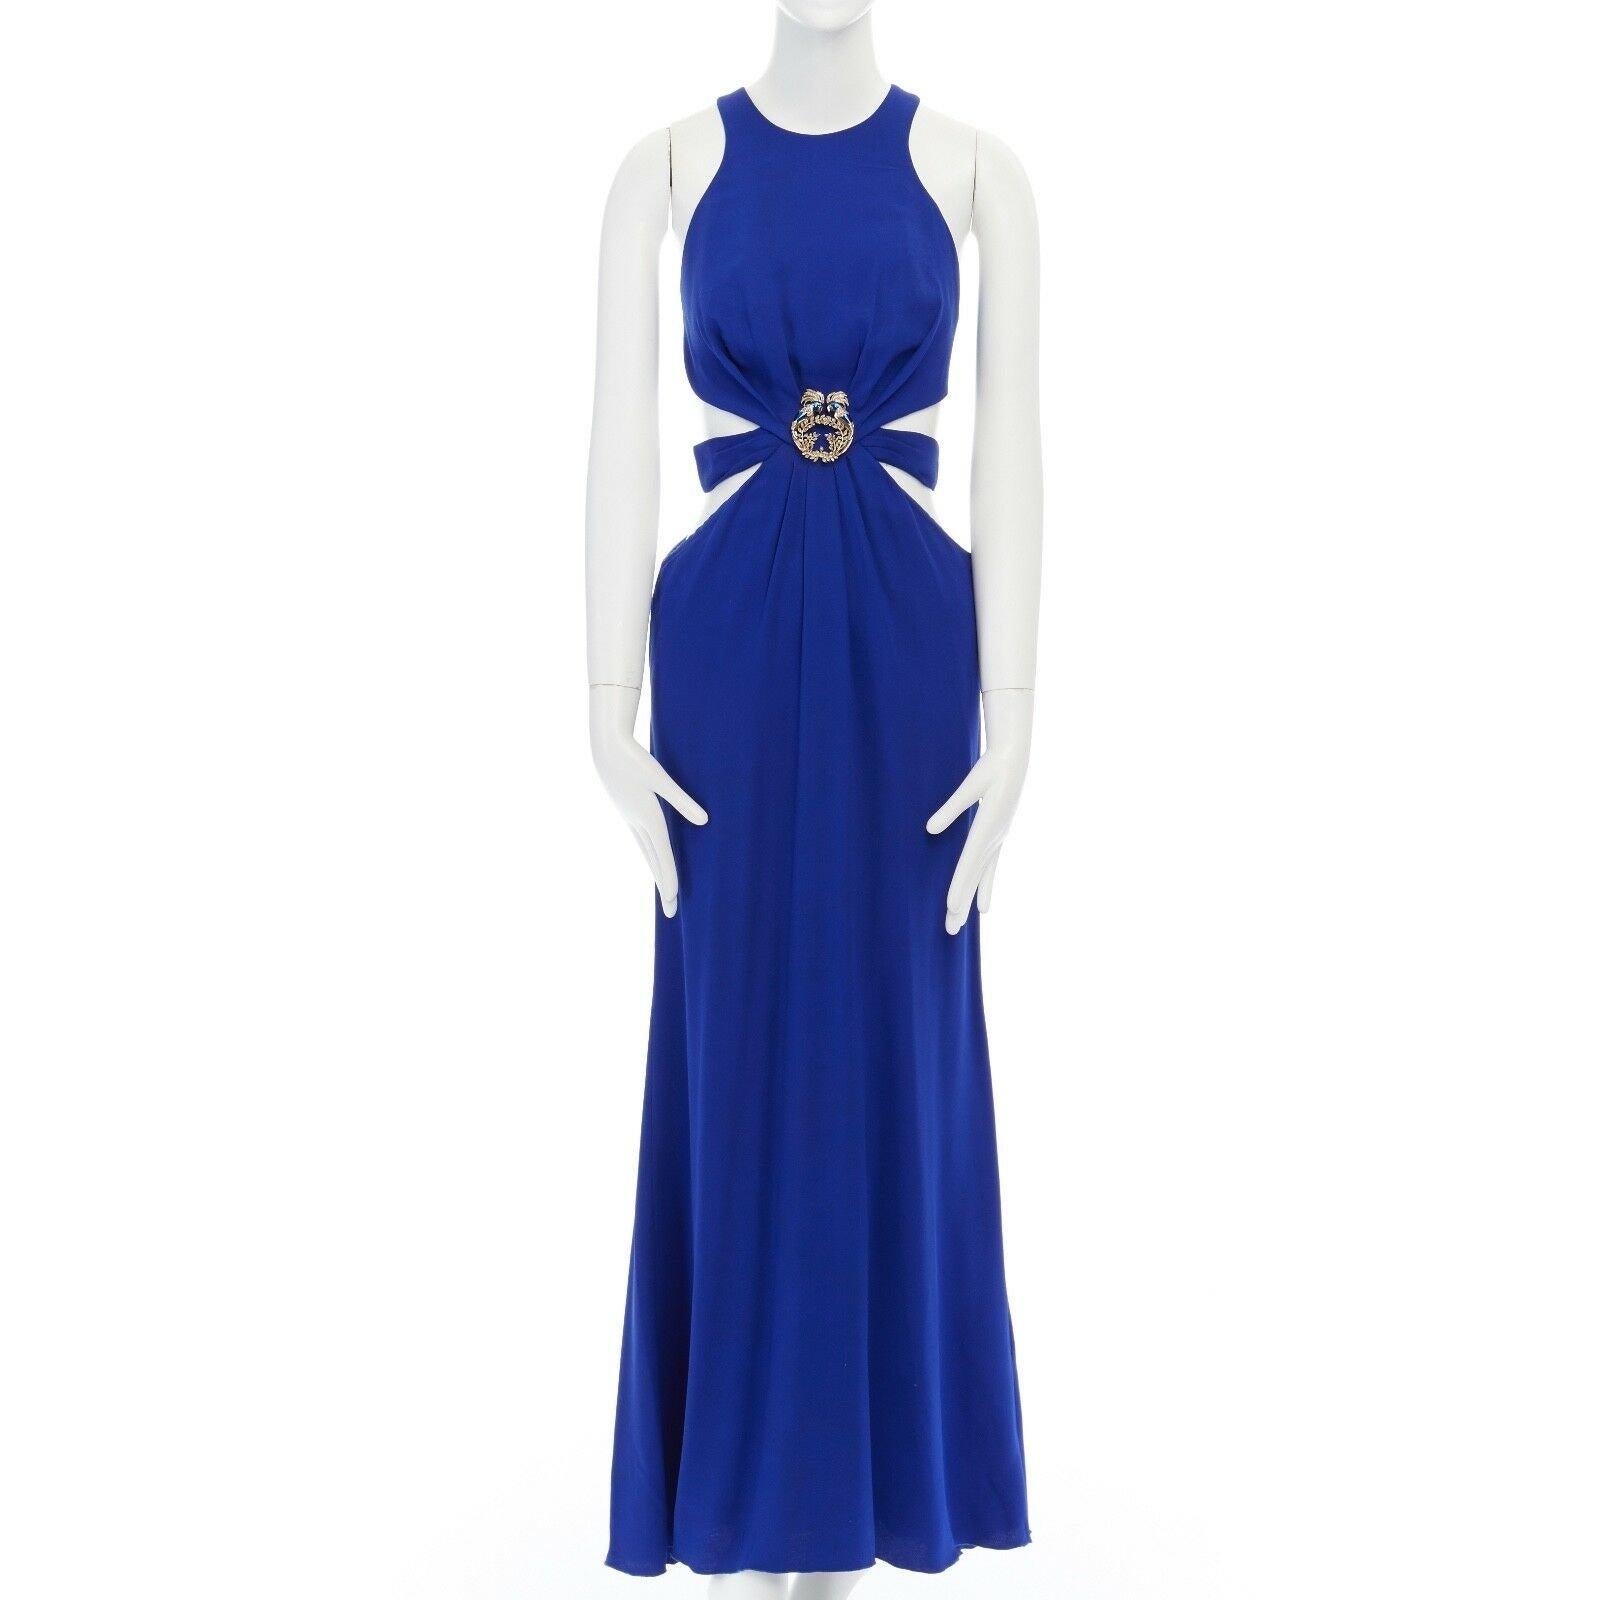 ROBERTO CAVALLI blue viscose peacock enamel brooch cut out waist gown dress S 
Reference: CC/VAHI00095 
Brand: Roberto Cavalli 
Designer: Roberto Cavalli 
Material: Viscose 
Color: Blue 
Pattern: Solid 
Extra Detail: Viscose blend. Electric blue.